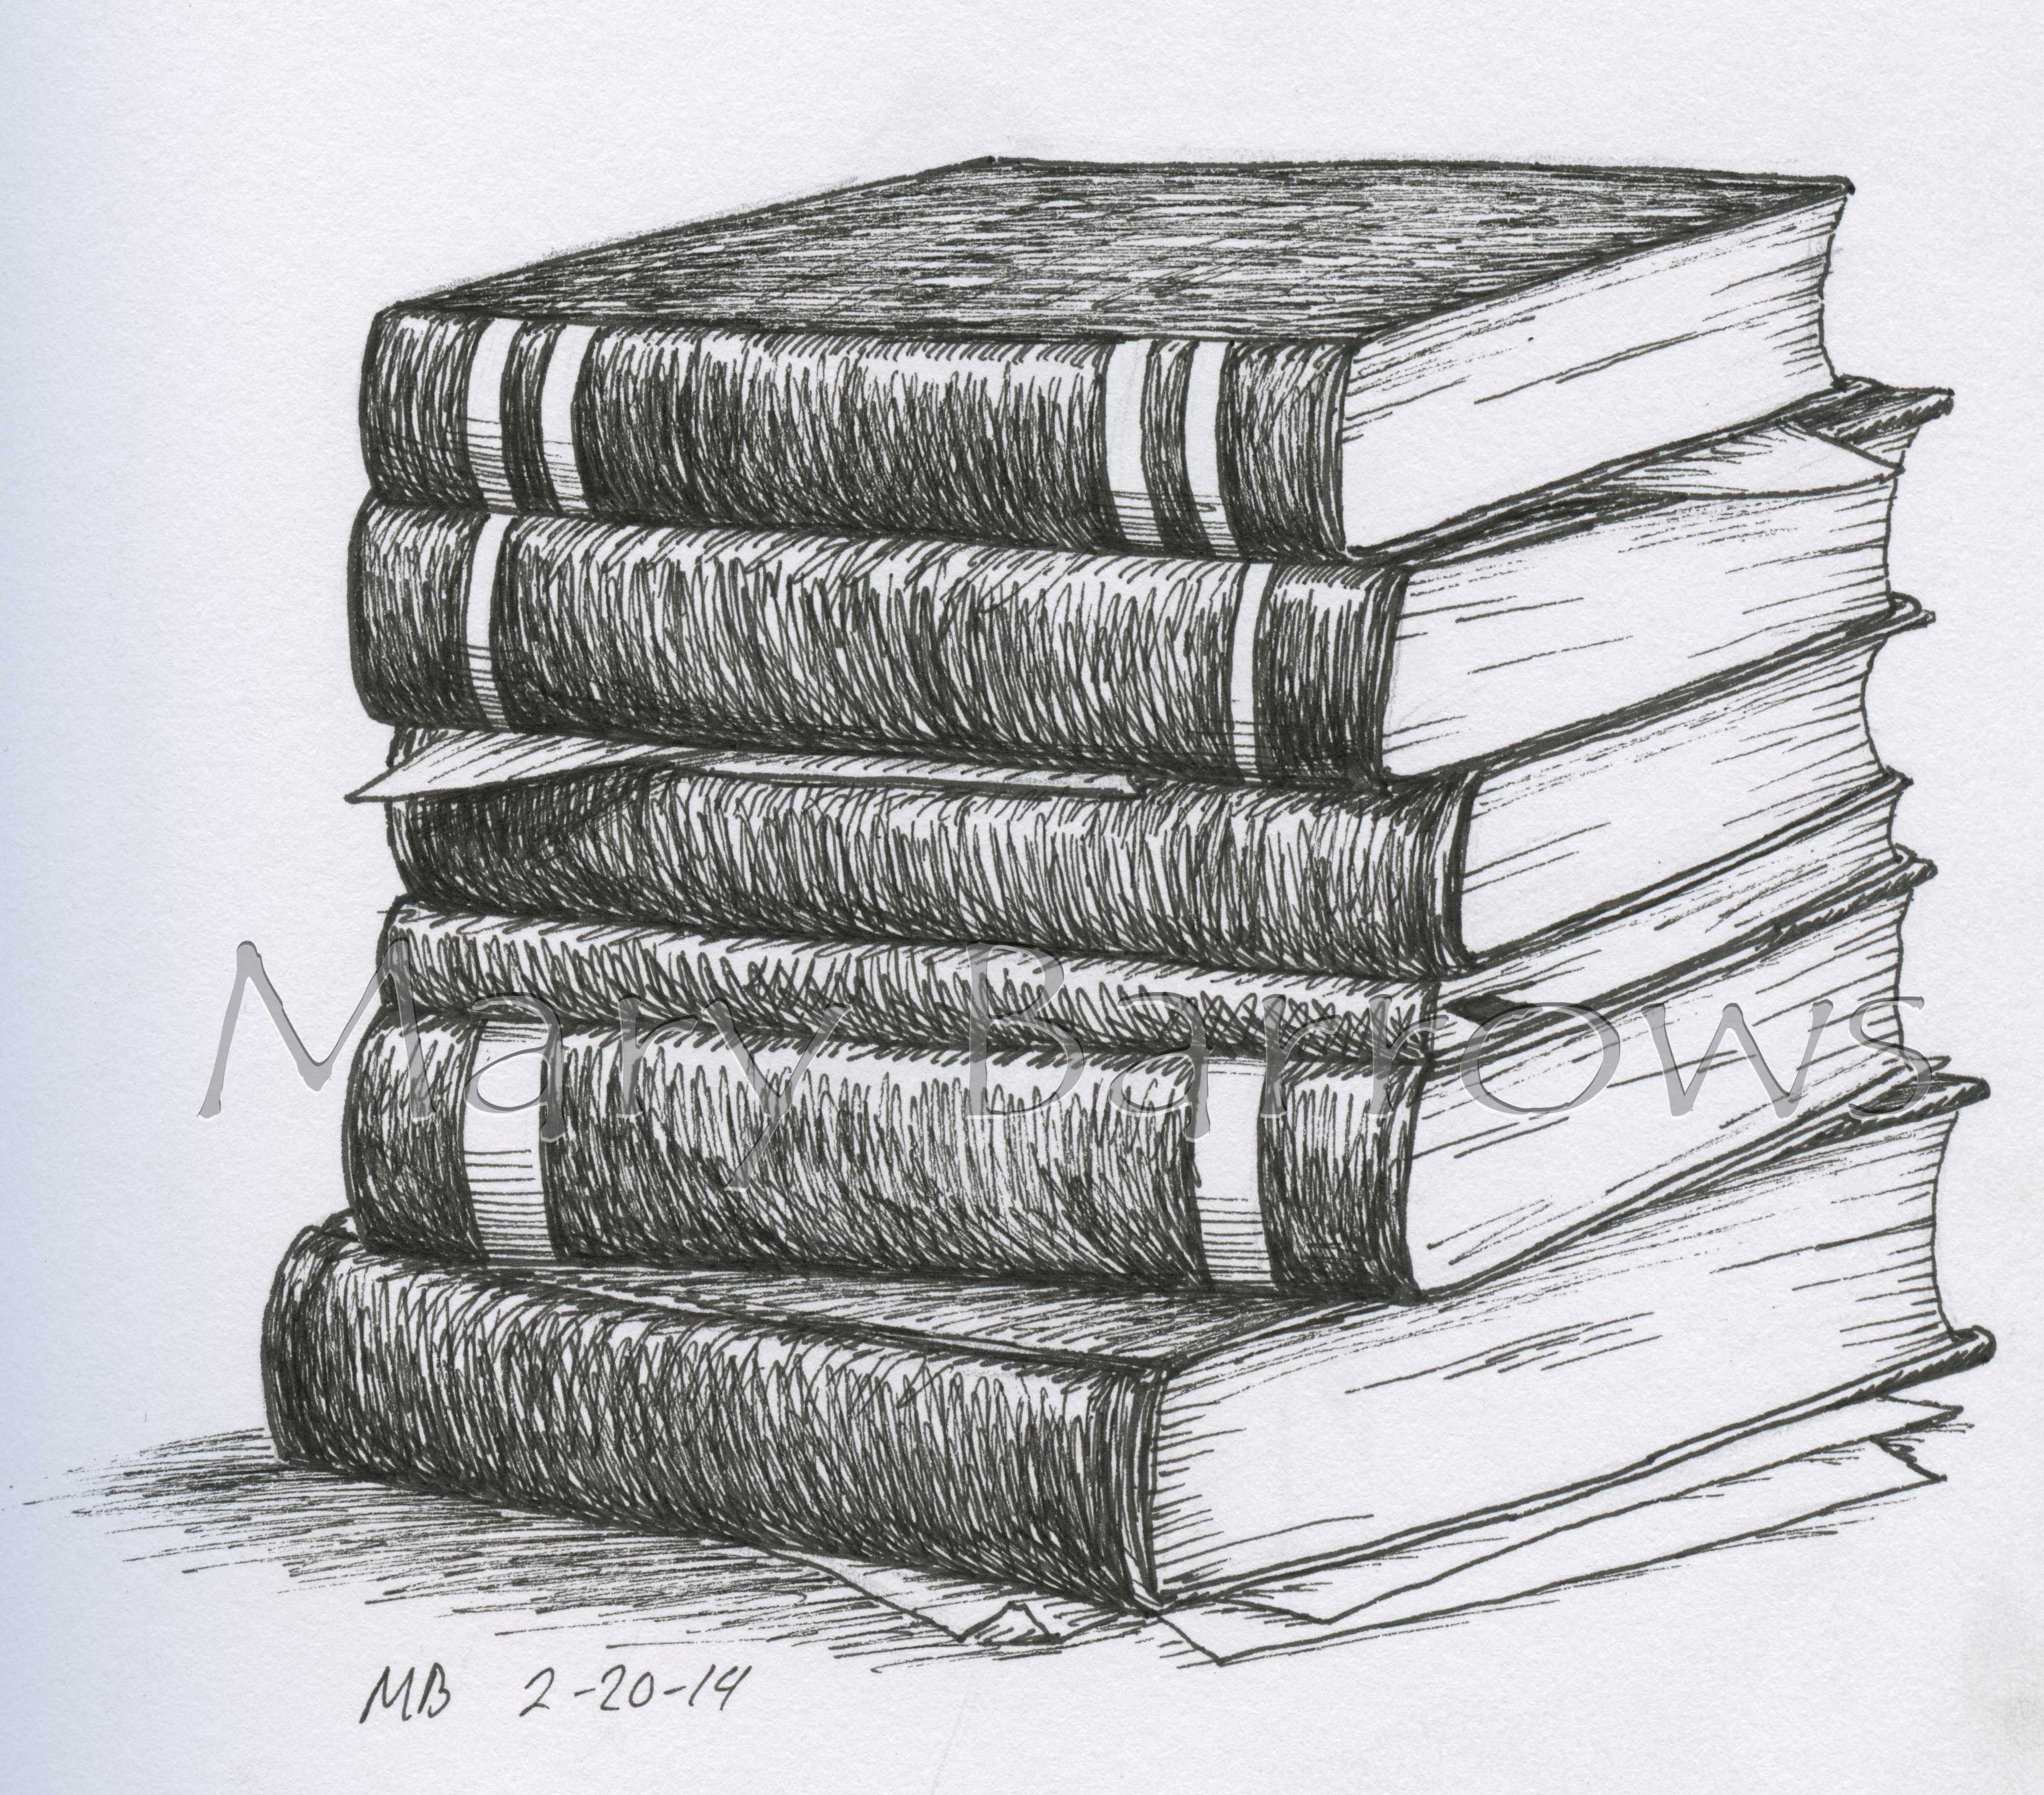 pile of books drawing - Google Search | Art techs & tips | Pinterest ...